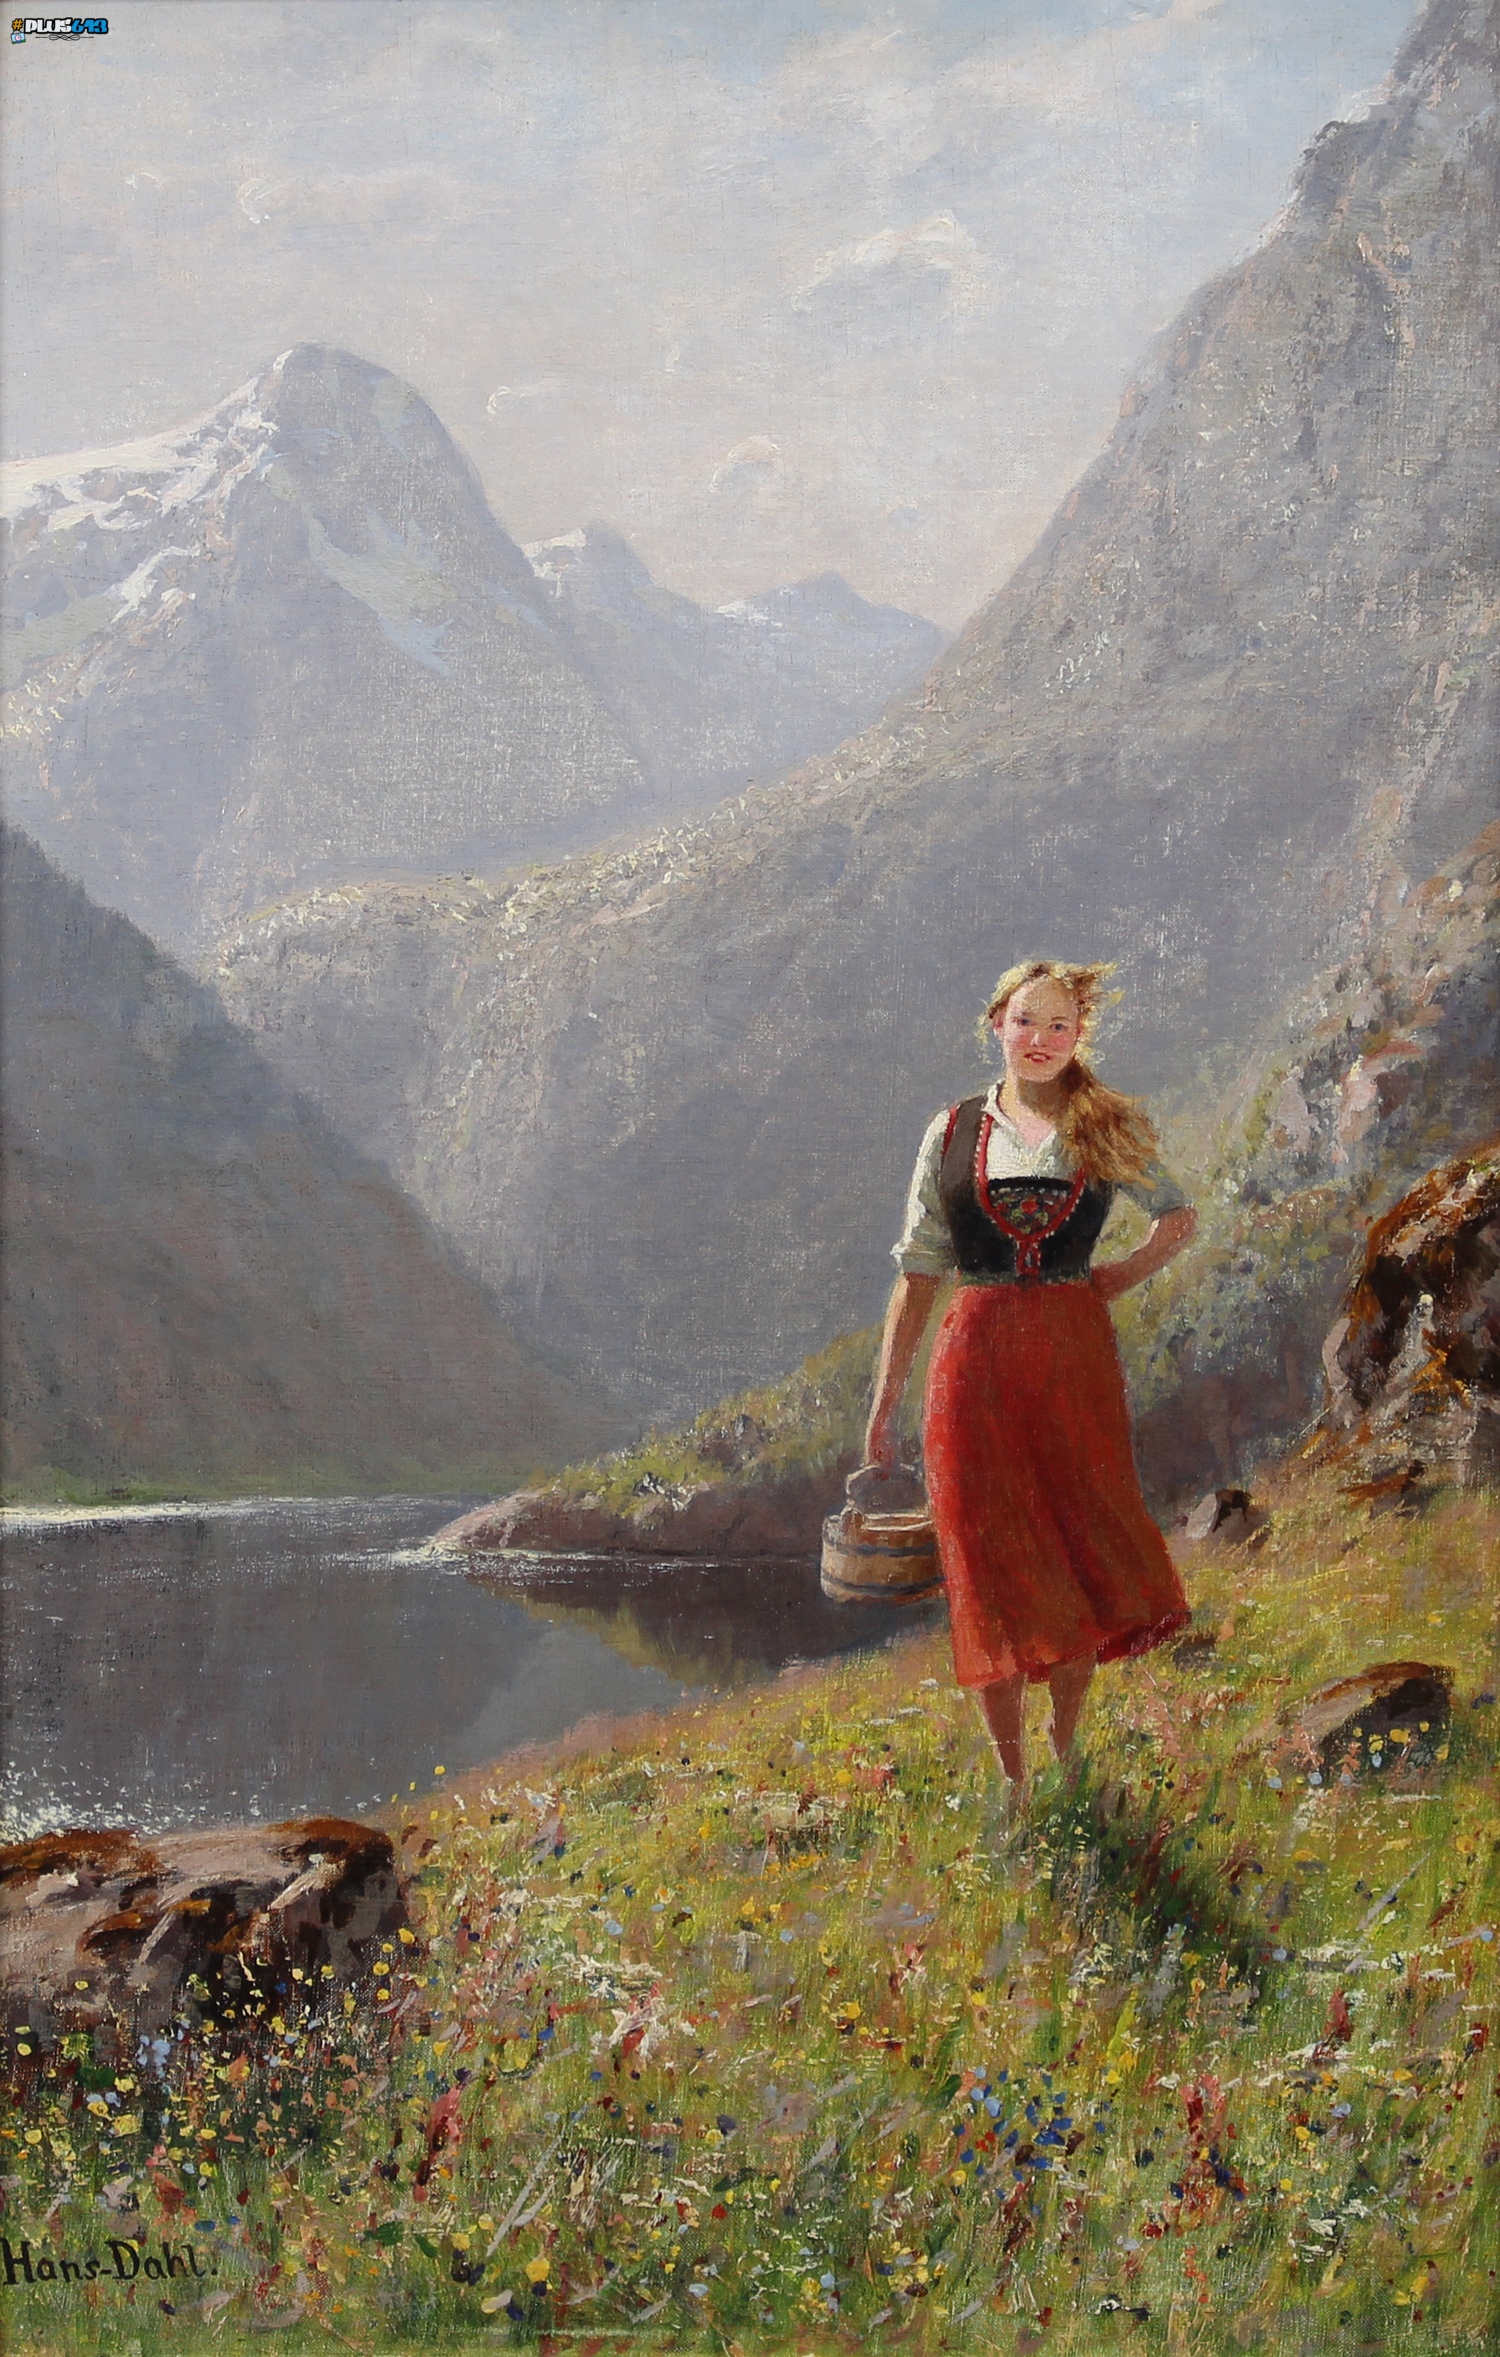 A Young Girl with a Basket in the Mountains by Hans Dahl